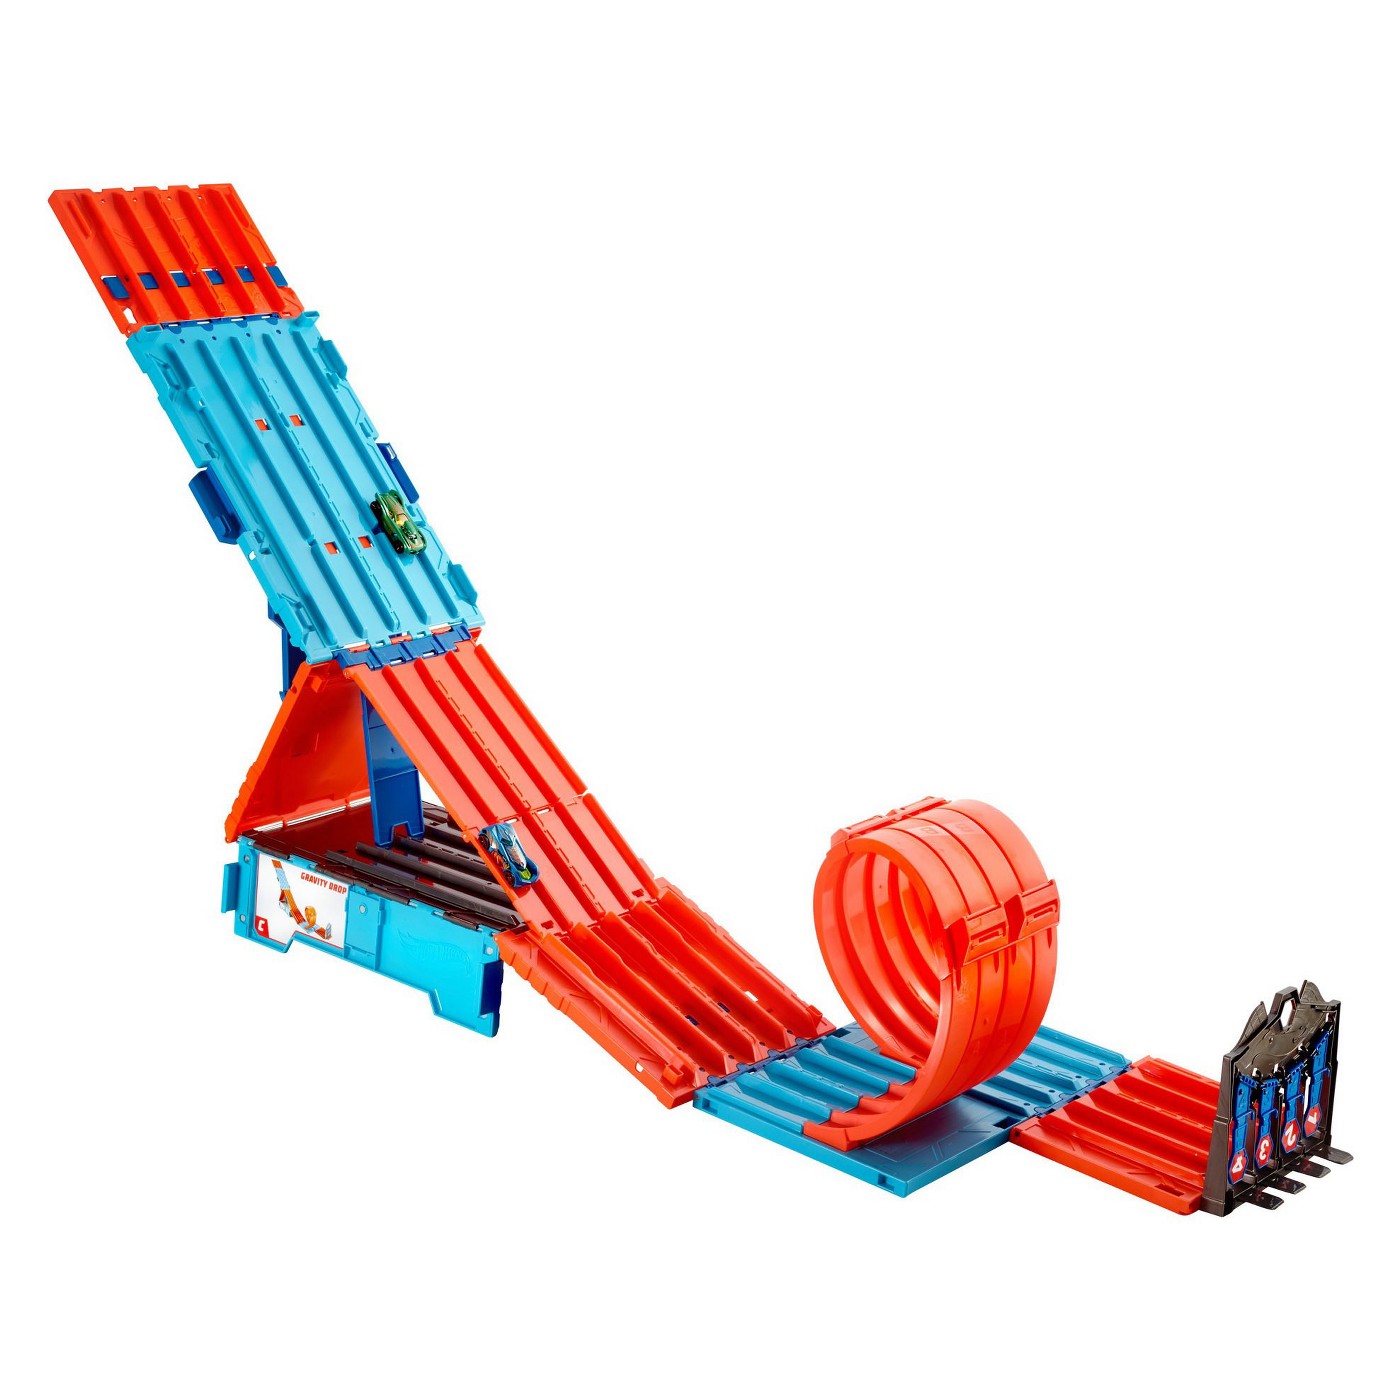 Hot Wheels Track Builder System Race Crate - image 1 of 8